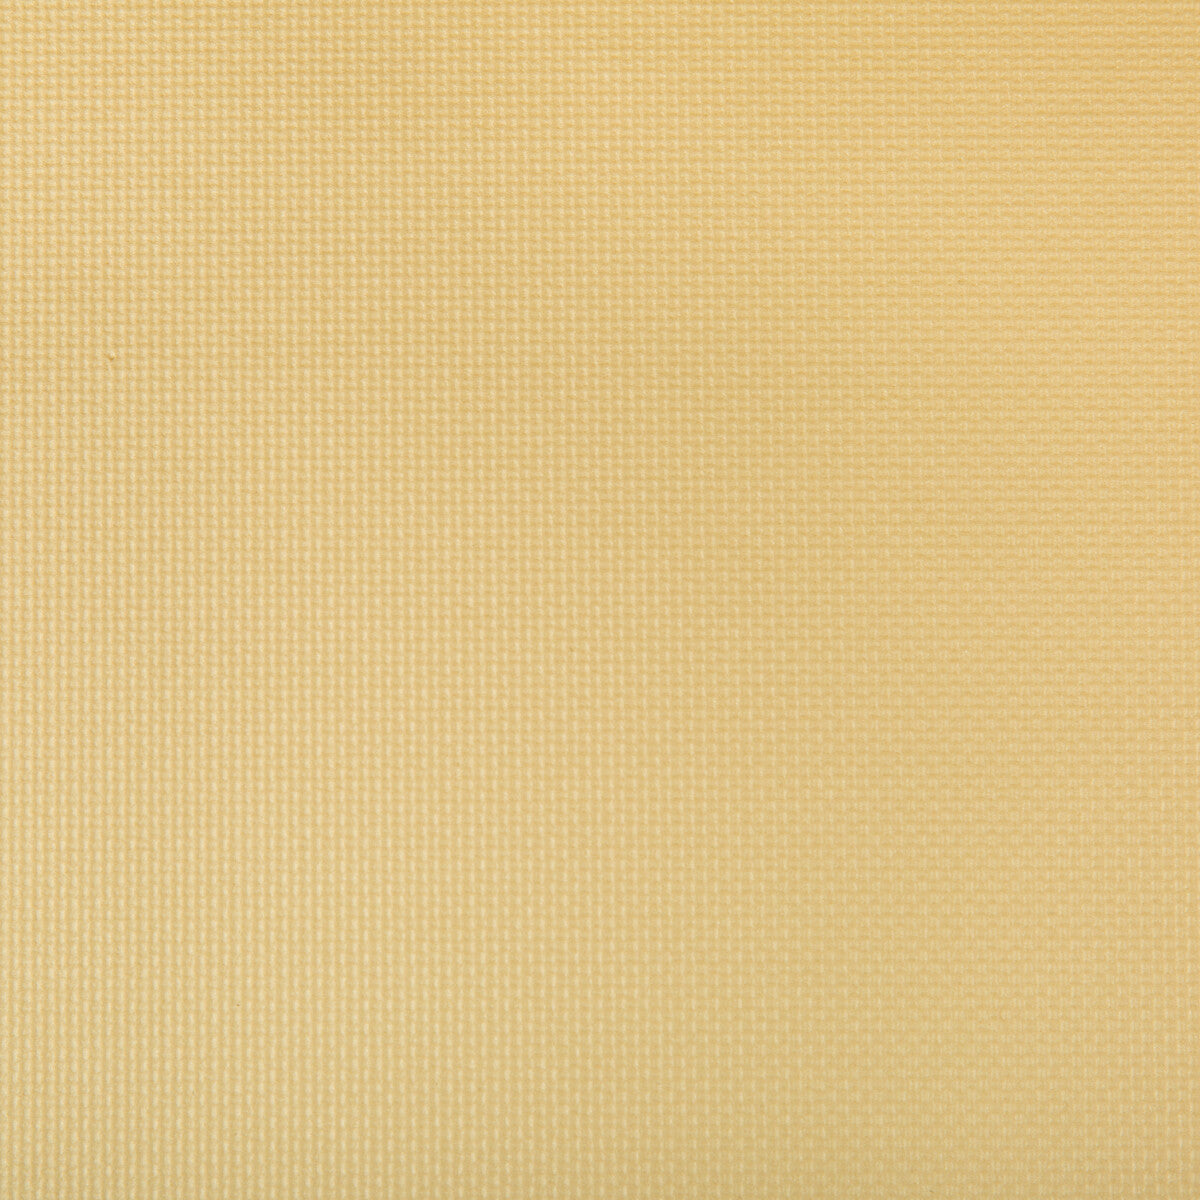 Sidney fabric in soft gold color - pattern SIDNEY.14.0 - by Kravet Contract